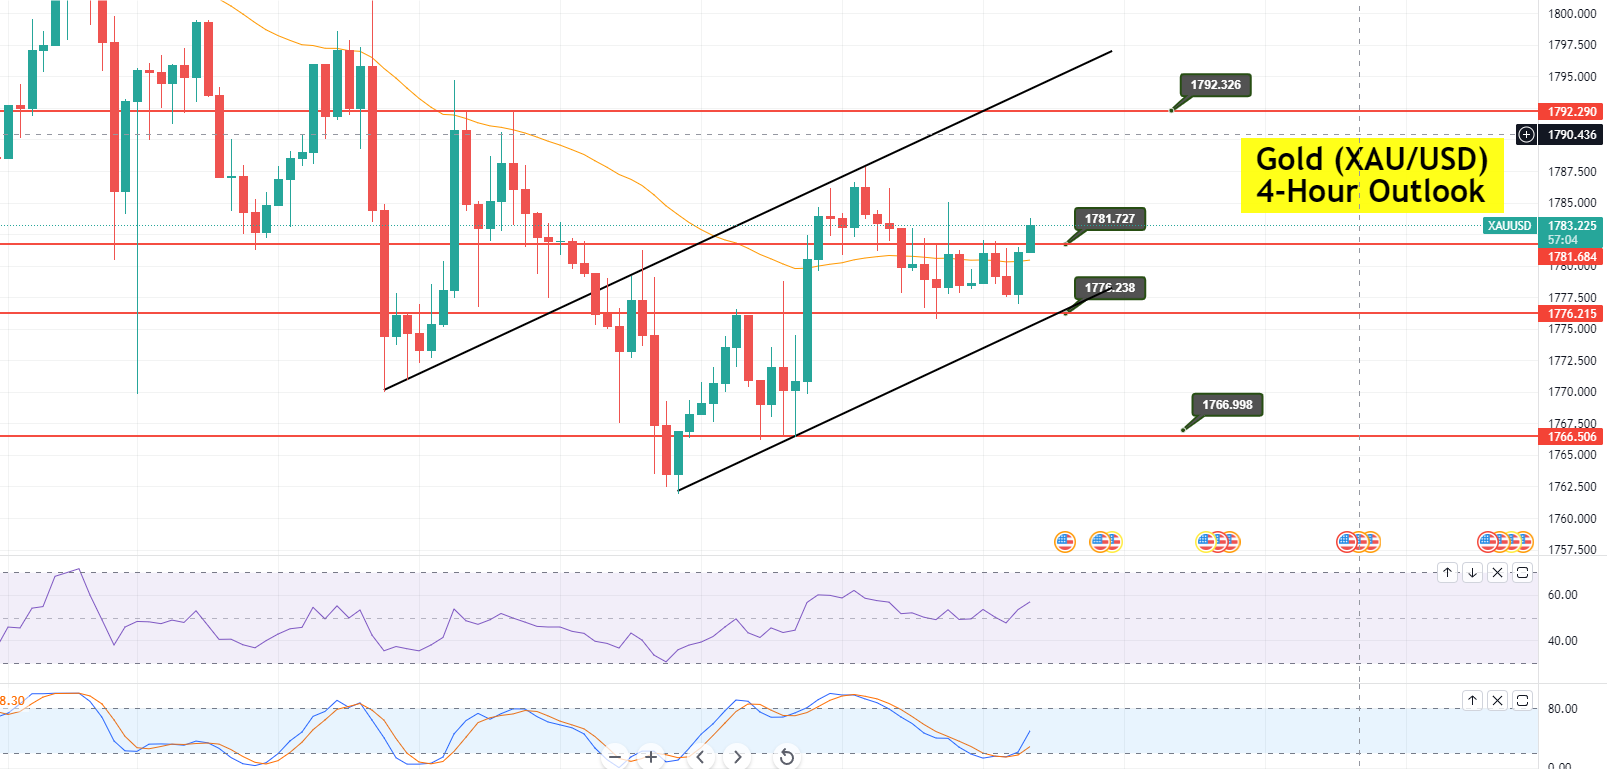 Gold gains support at $1,776 – Buckle up for a buy trade